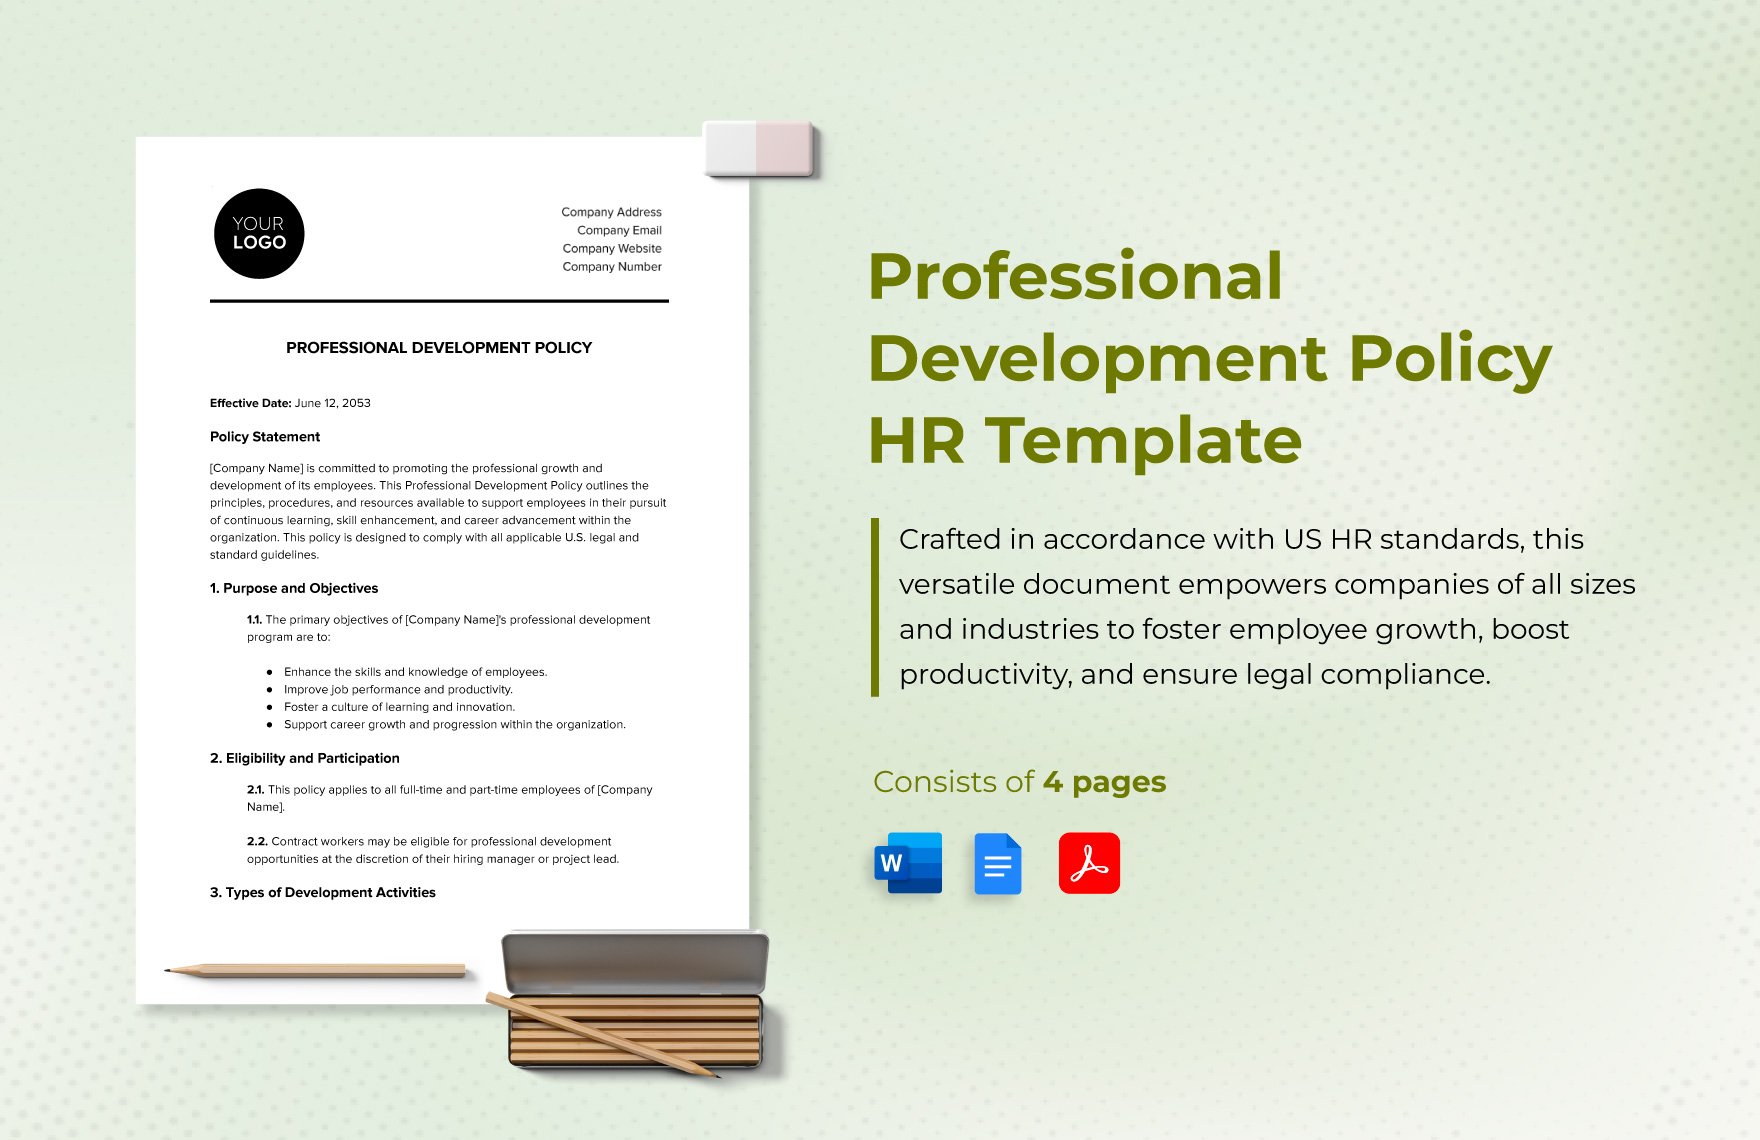 Professional Development Policy HR Template